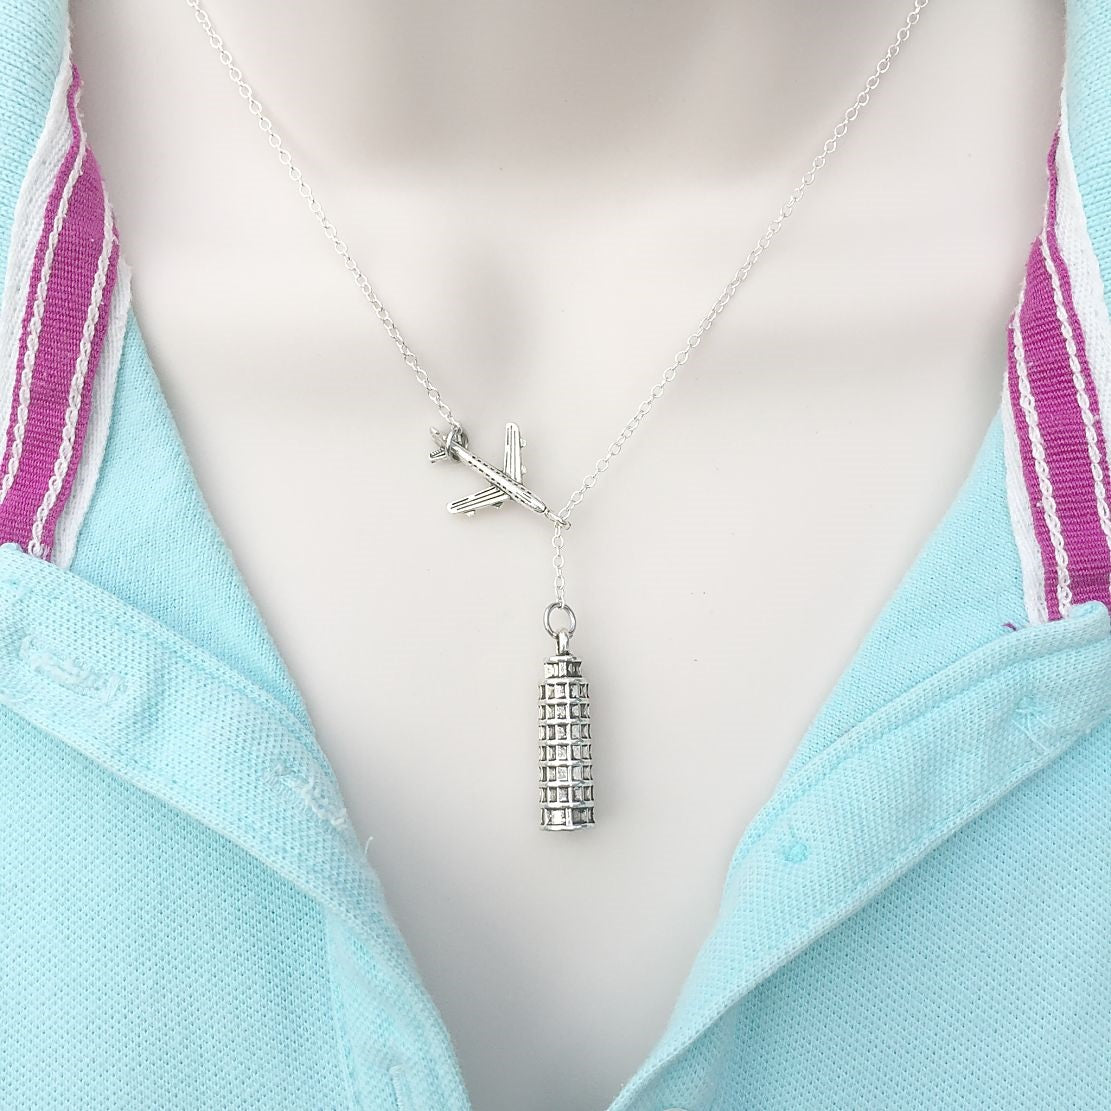 Going to ITALY, Pisa Tower Silver Lariat Y Necklace.